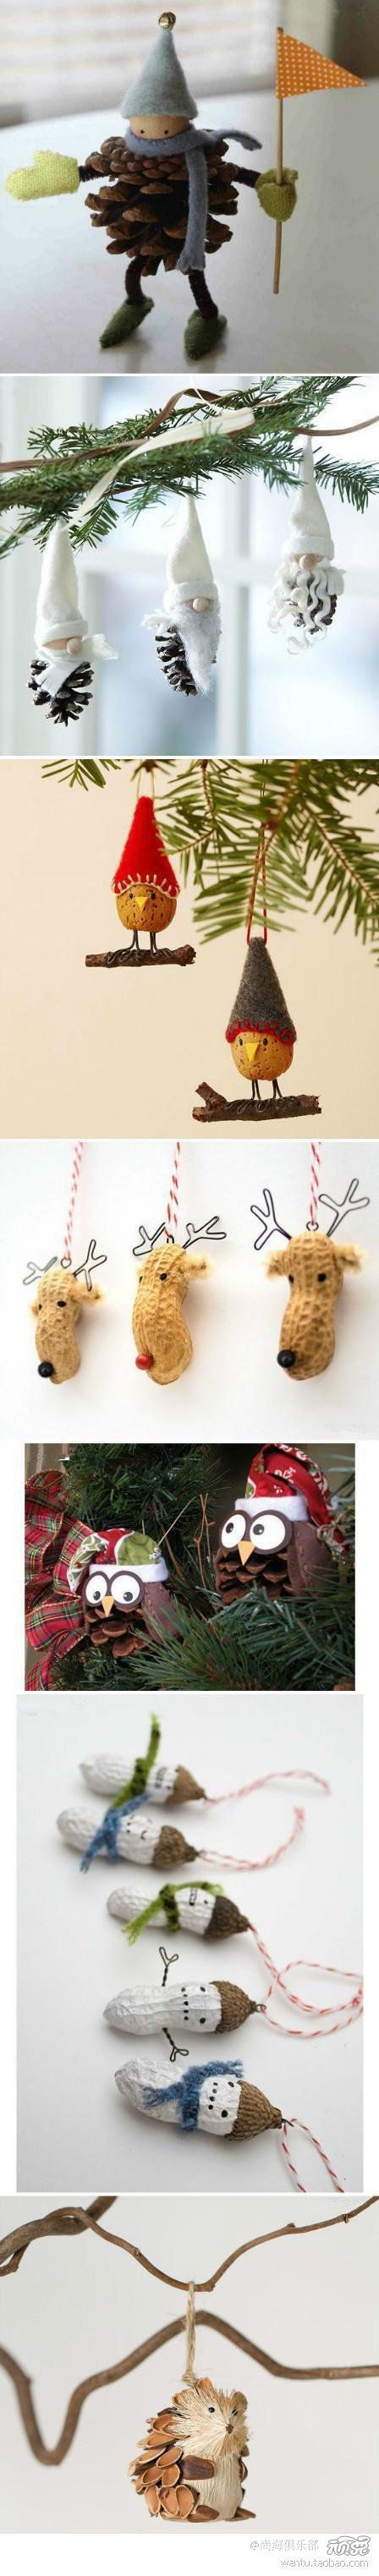 DIY Craft Inspirations – seriously cute ornaments crafted from pinecones, peanuts…